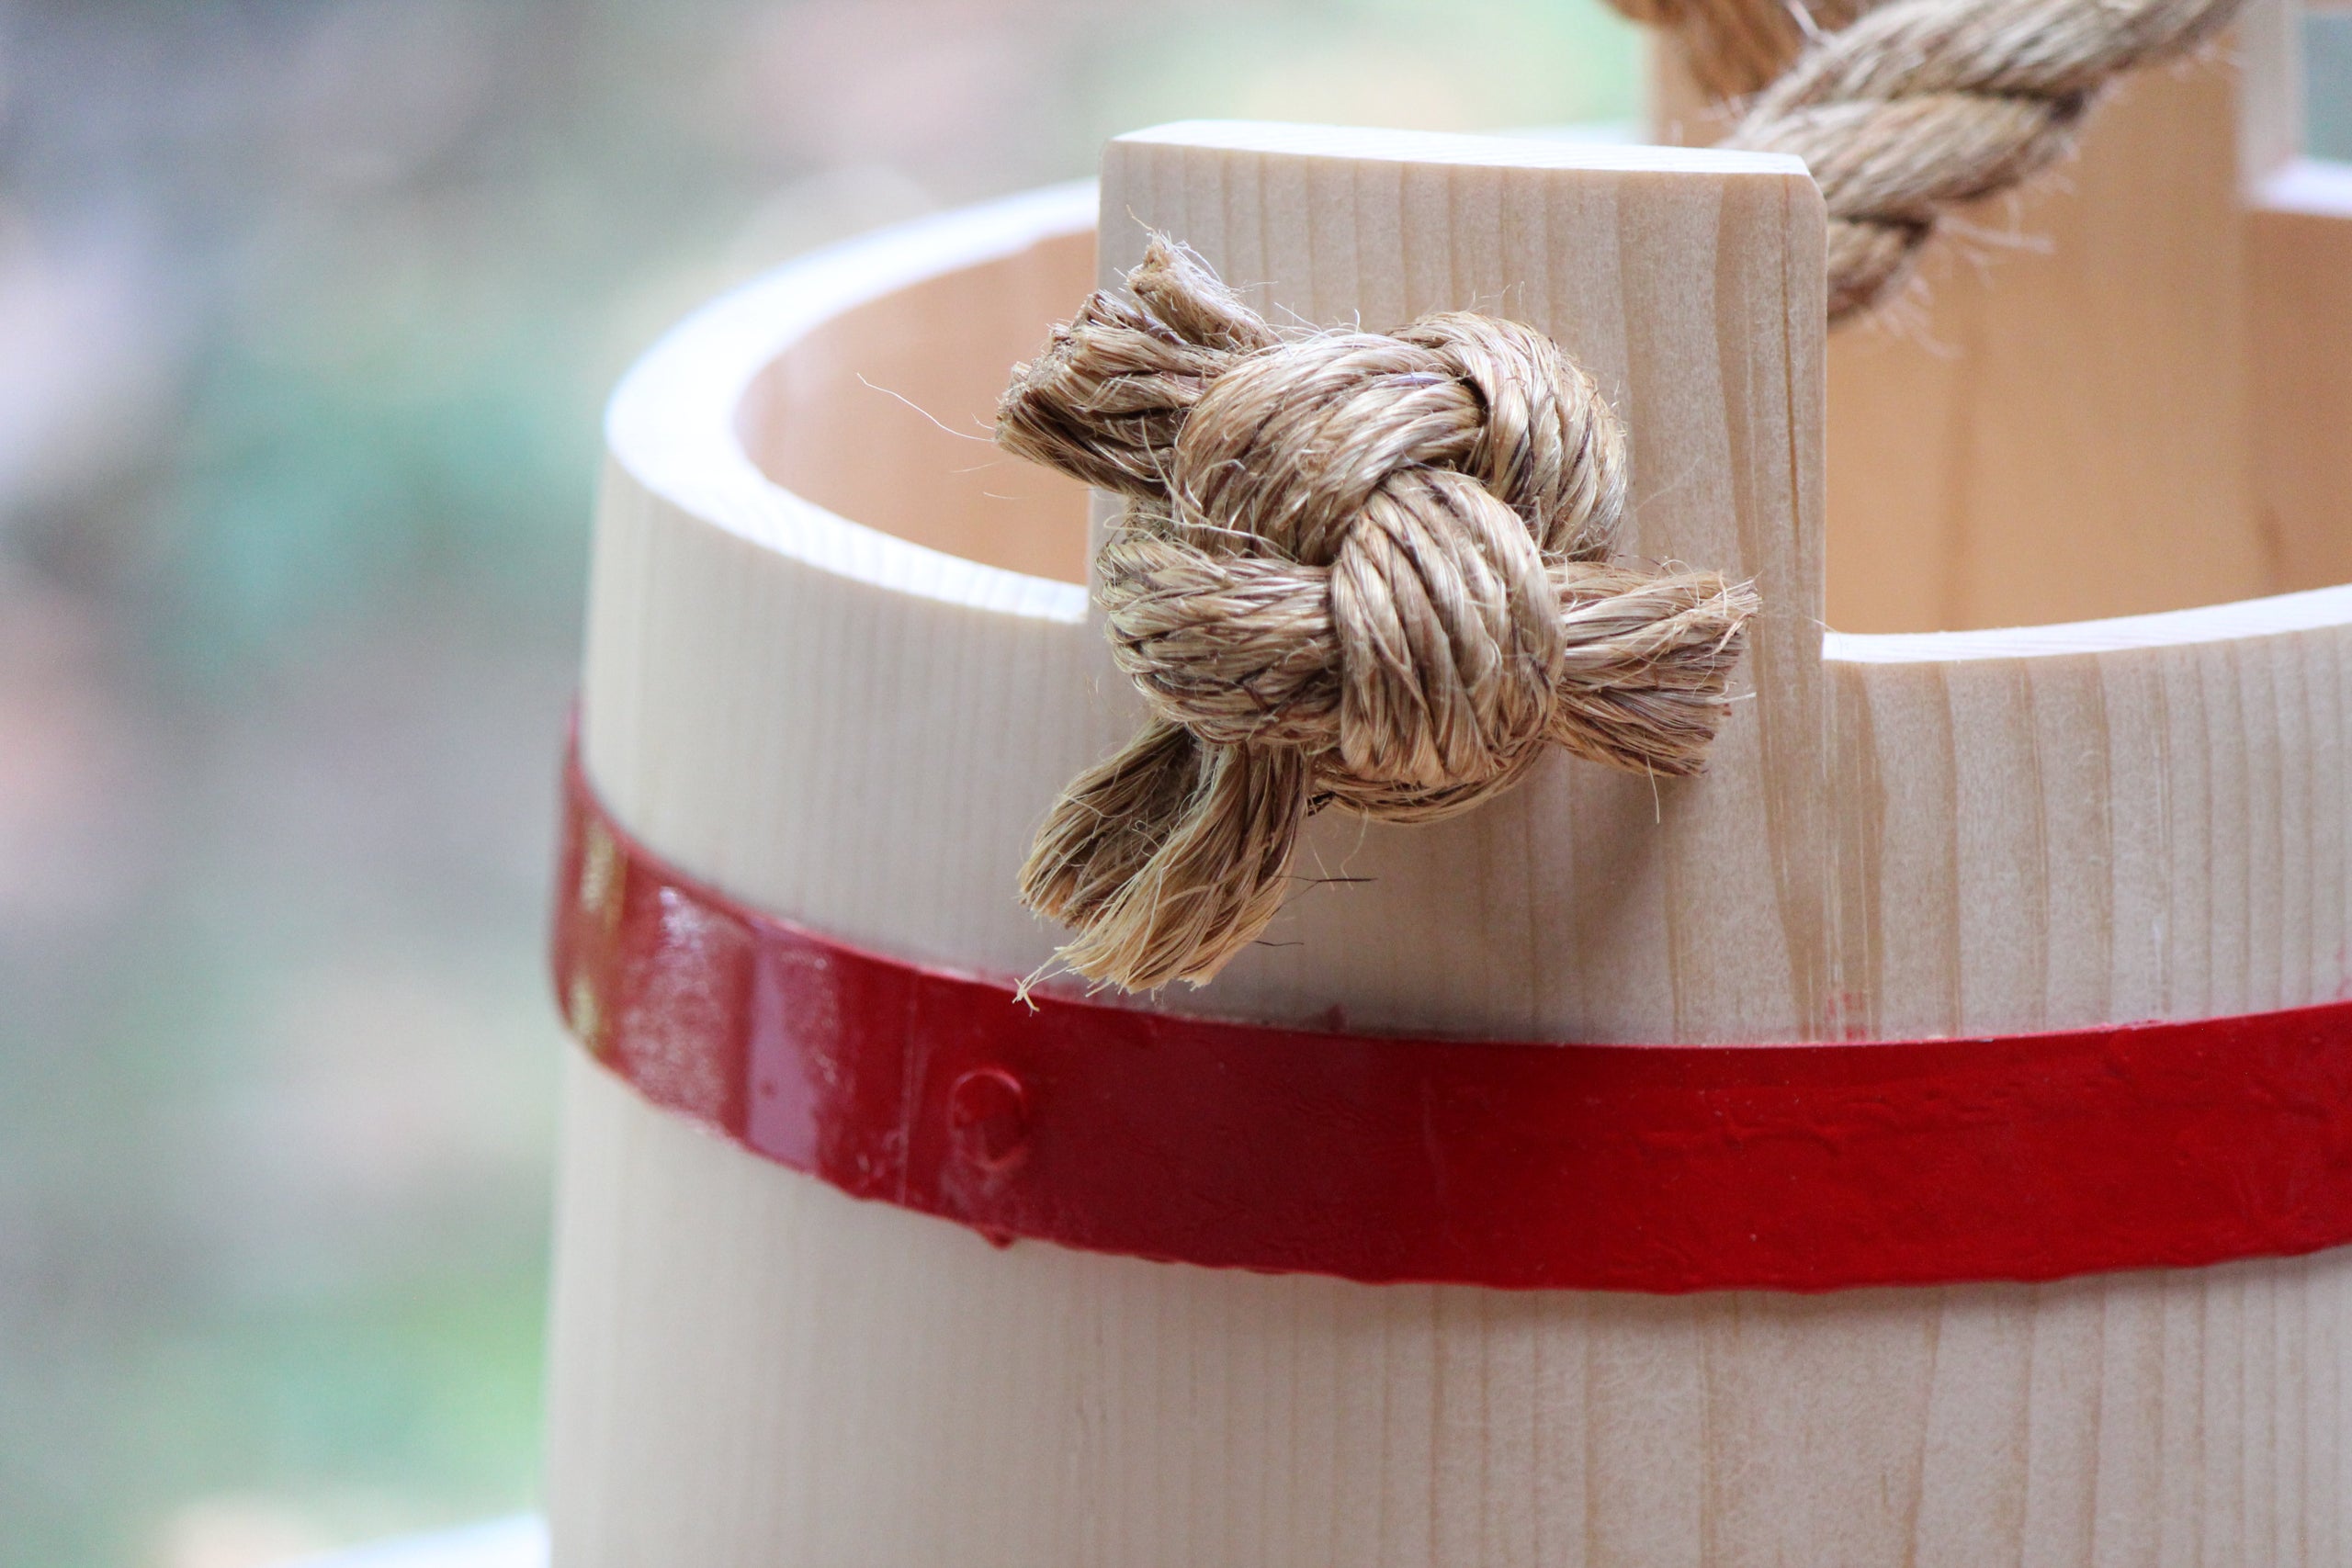 Wooden Bucket, white pine, red painted iron hoops, manila rope handle